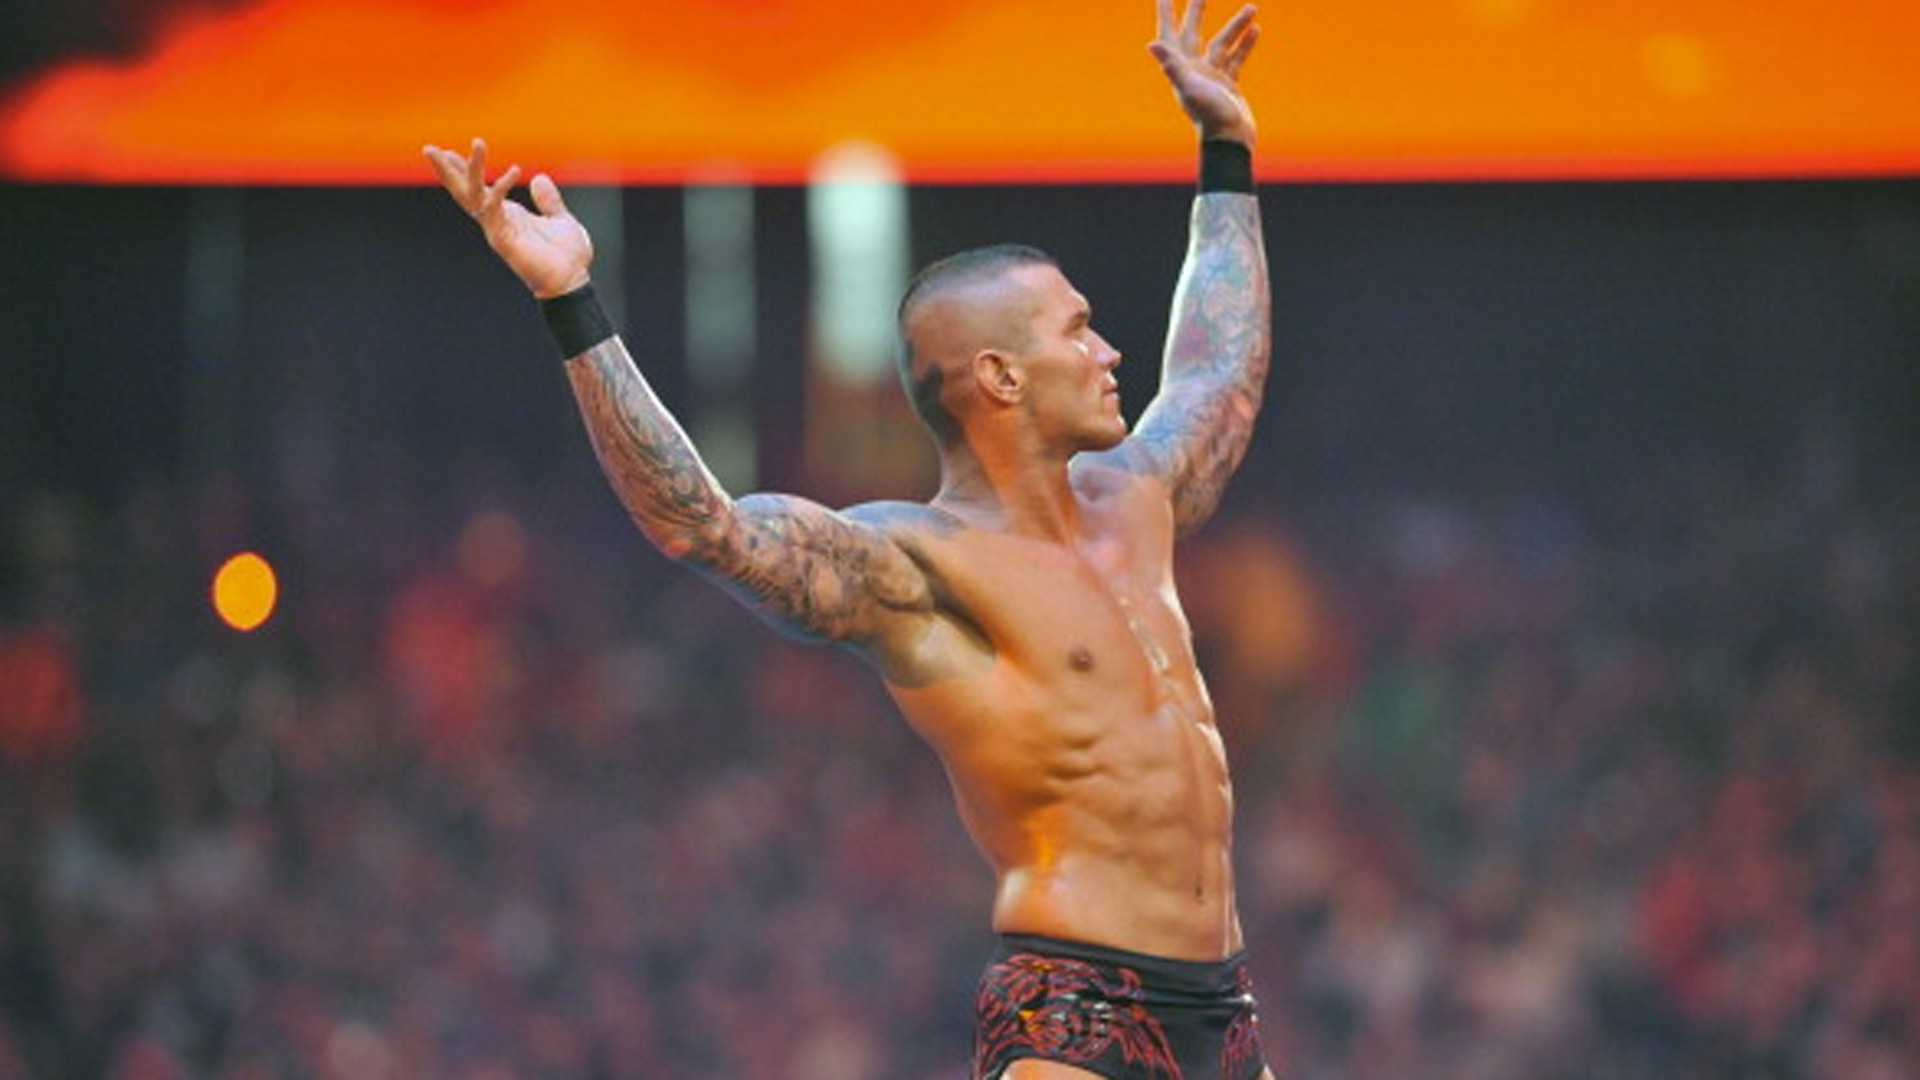 randy orton wallpaper download,barechested,muscle,bodybuilder,arm,physical fitness